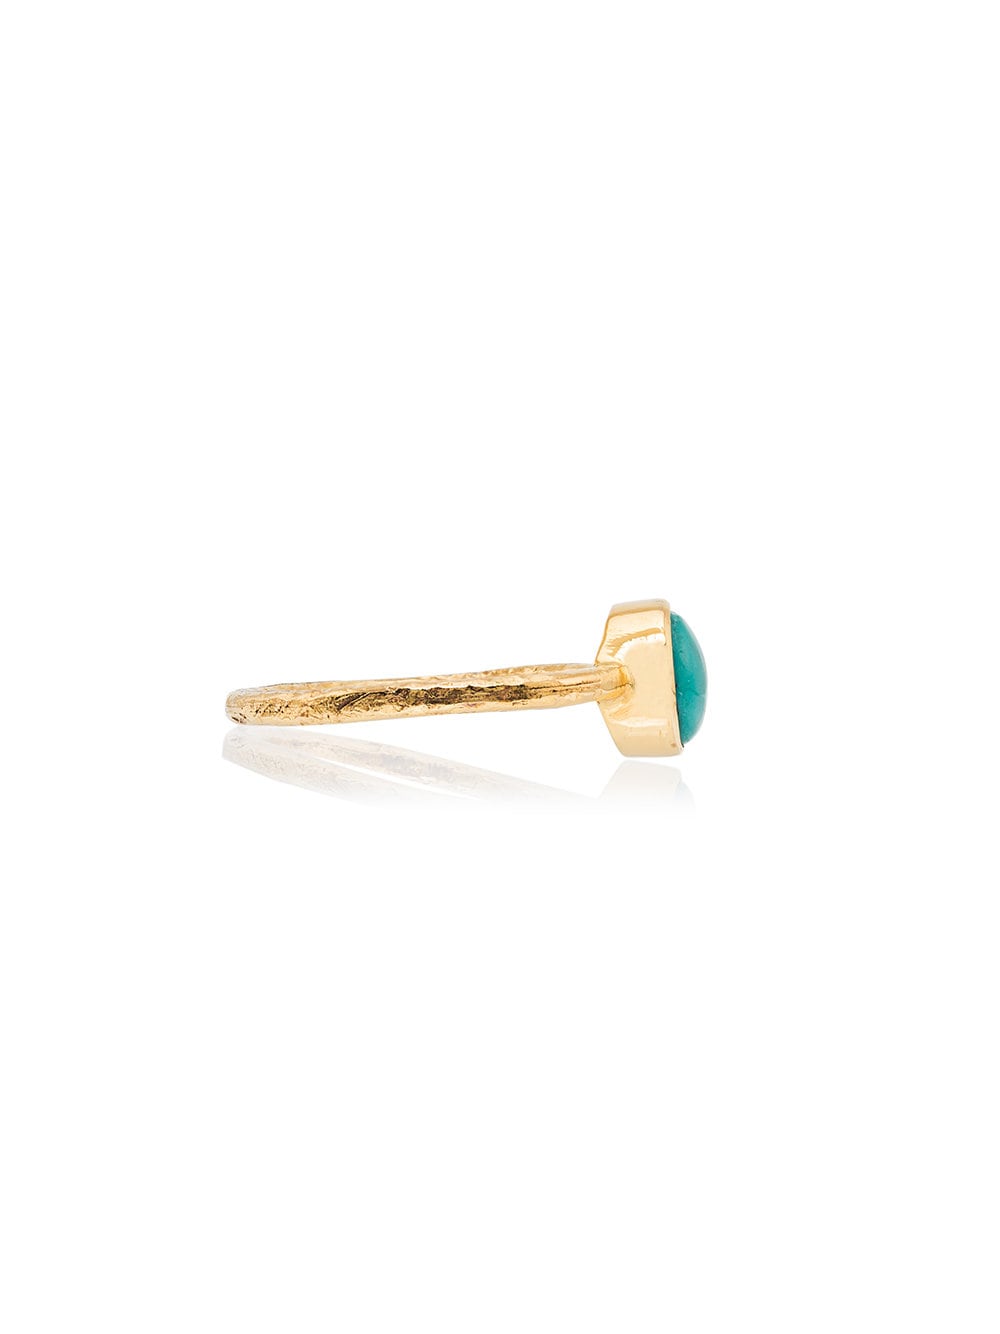 18k gold and turquoise Sleeping Beauty ring